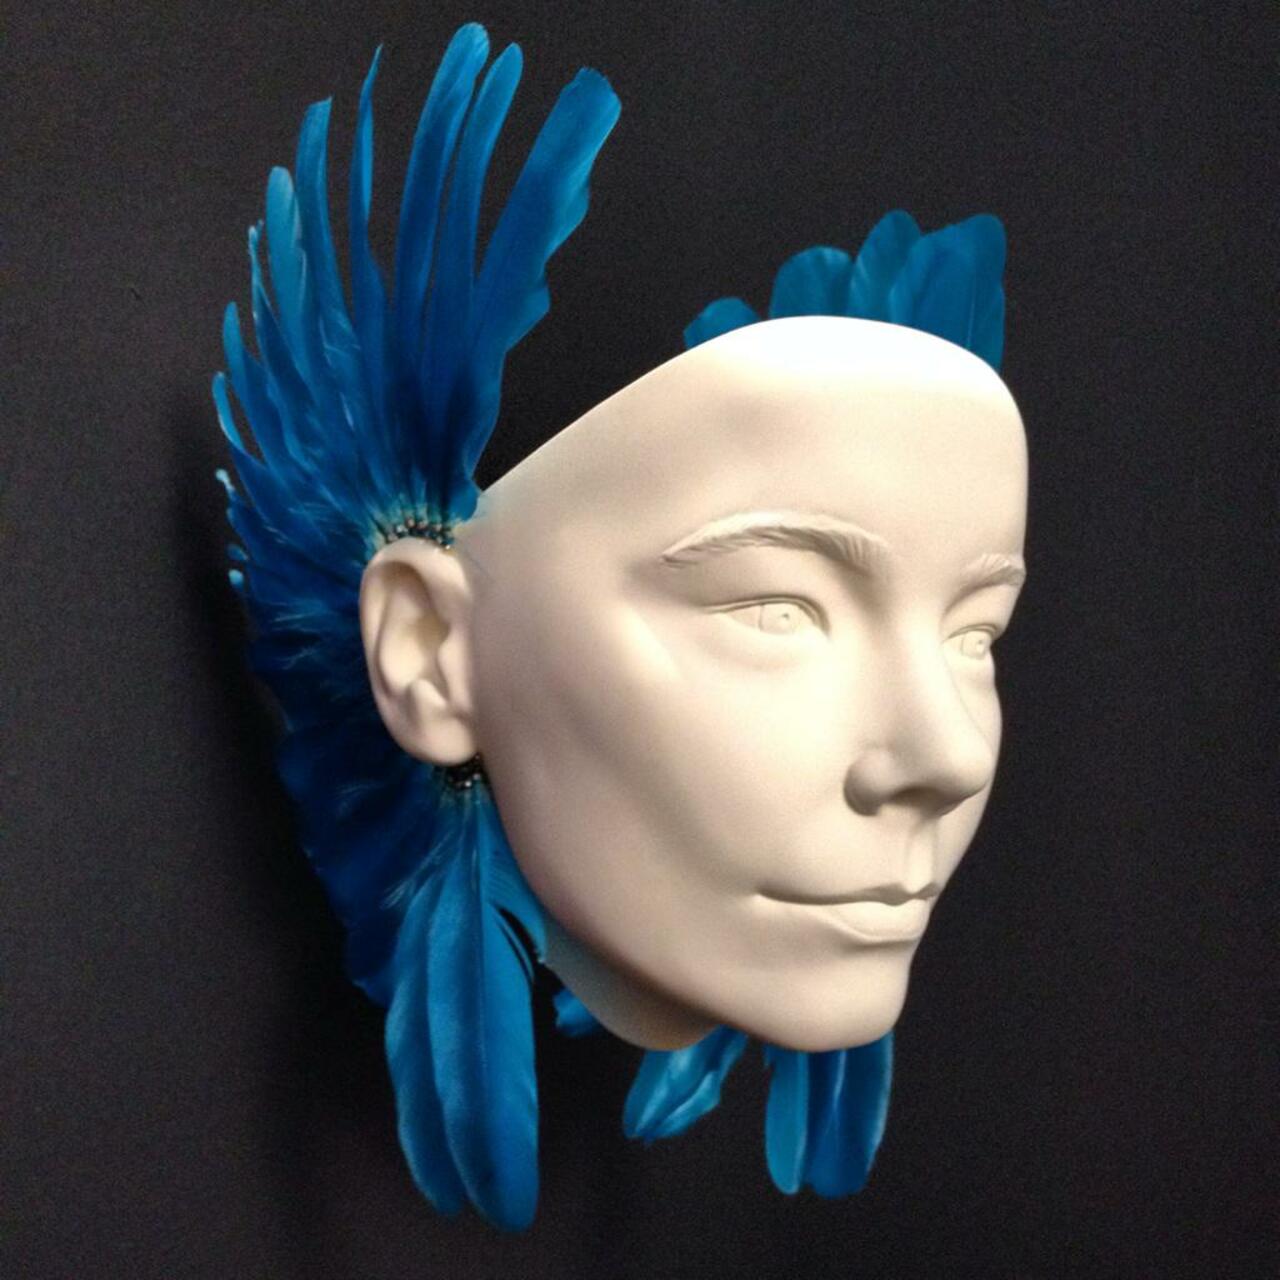 Bjork feathered earring REALNESS at the MOMA. #fashion #art http://t.co/xEcyEU3dGB